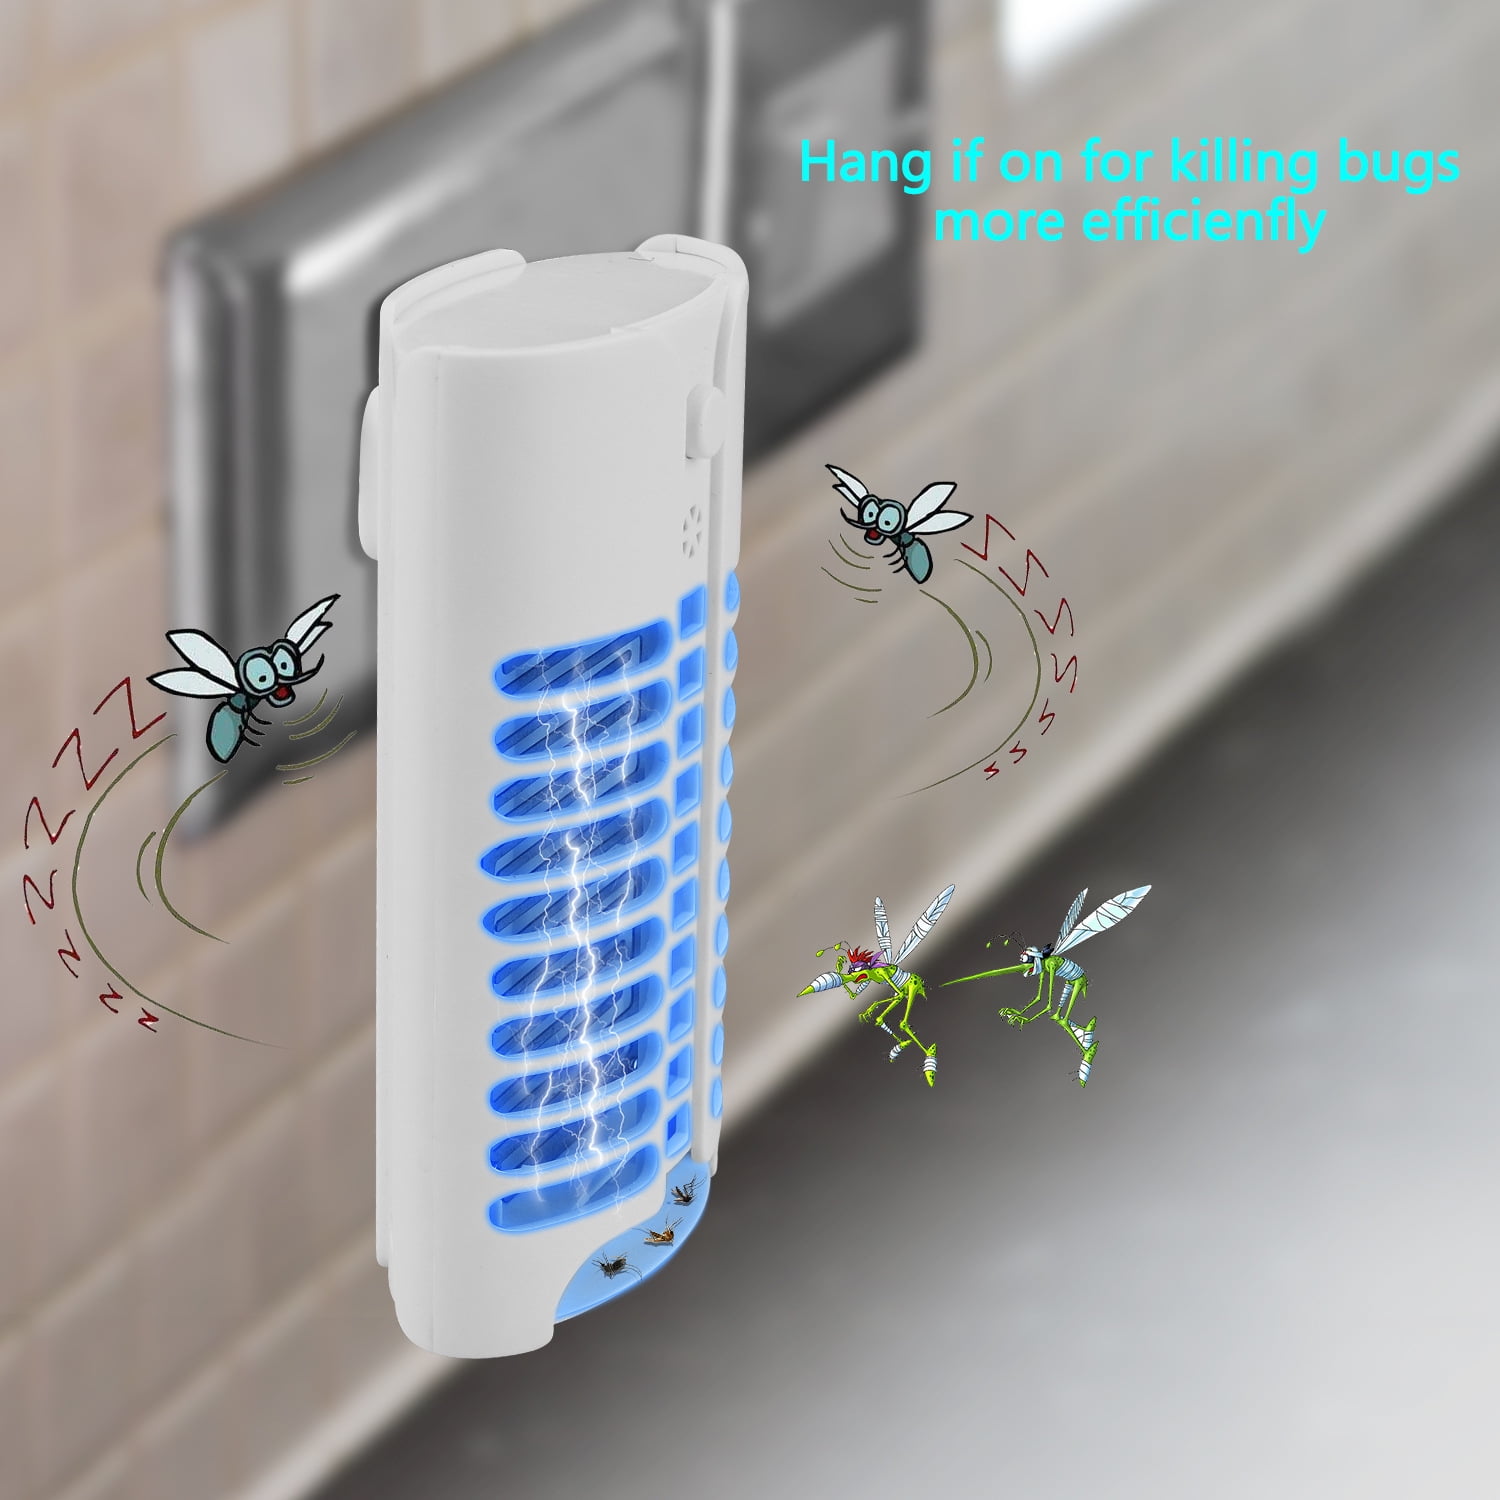 Kyerivs Bug Zapper,Electronic Indoor USB Powered Insect Catcher,LED Photocatalyst,Non-Chemical,Non-Radiative,360°Coverage Fly Zapper with Built in Fan Mosquito Catcher Trap 